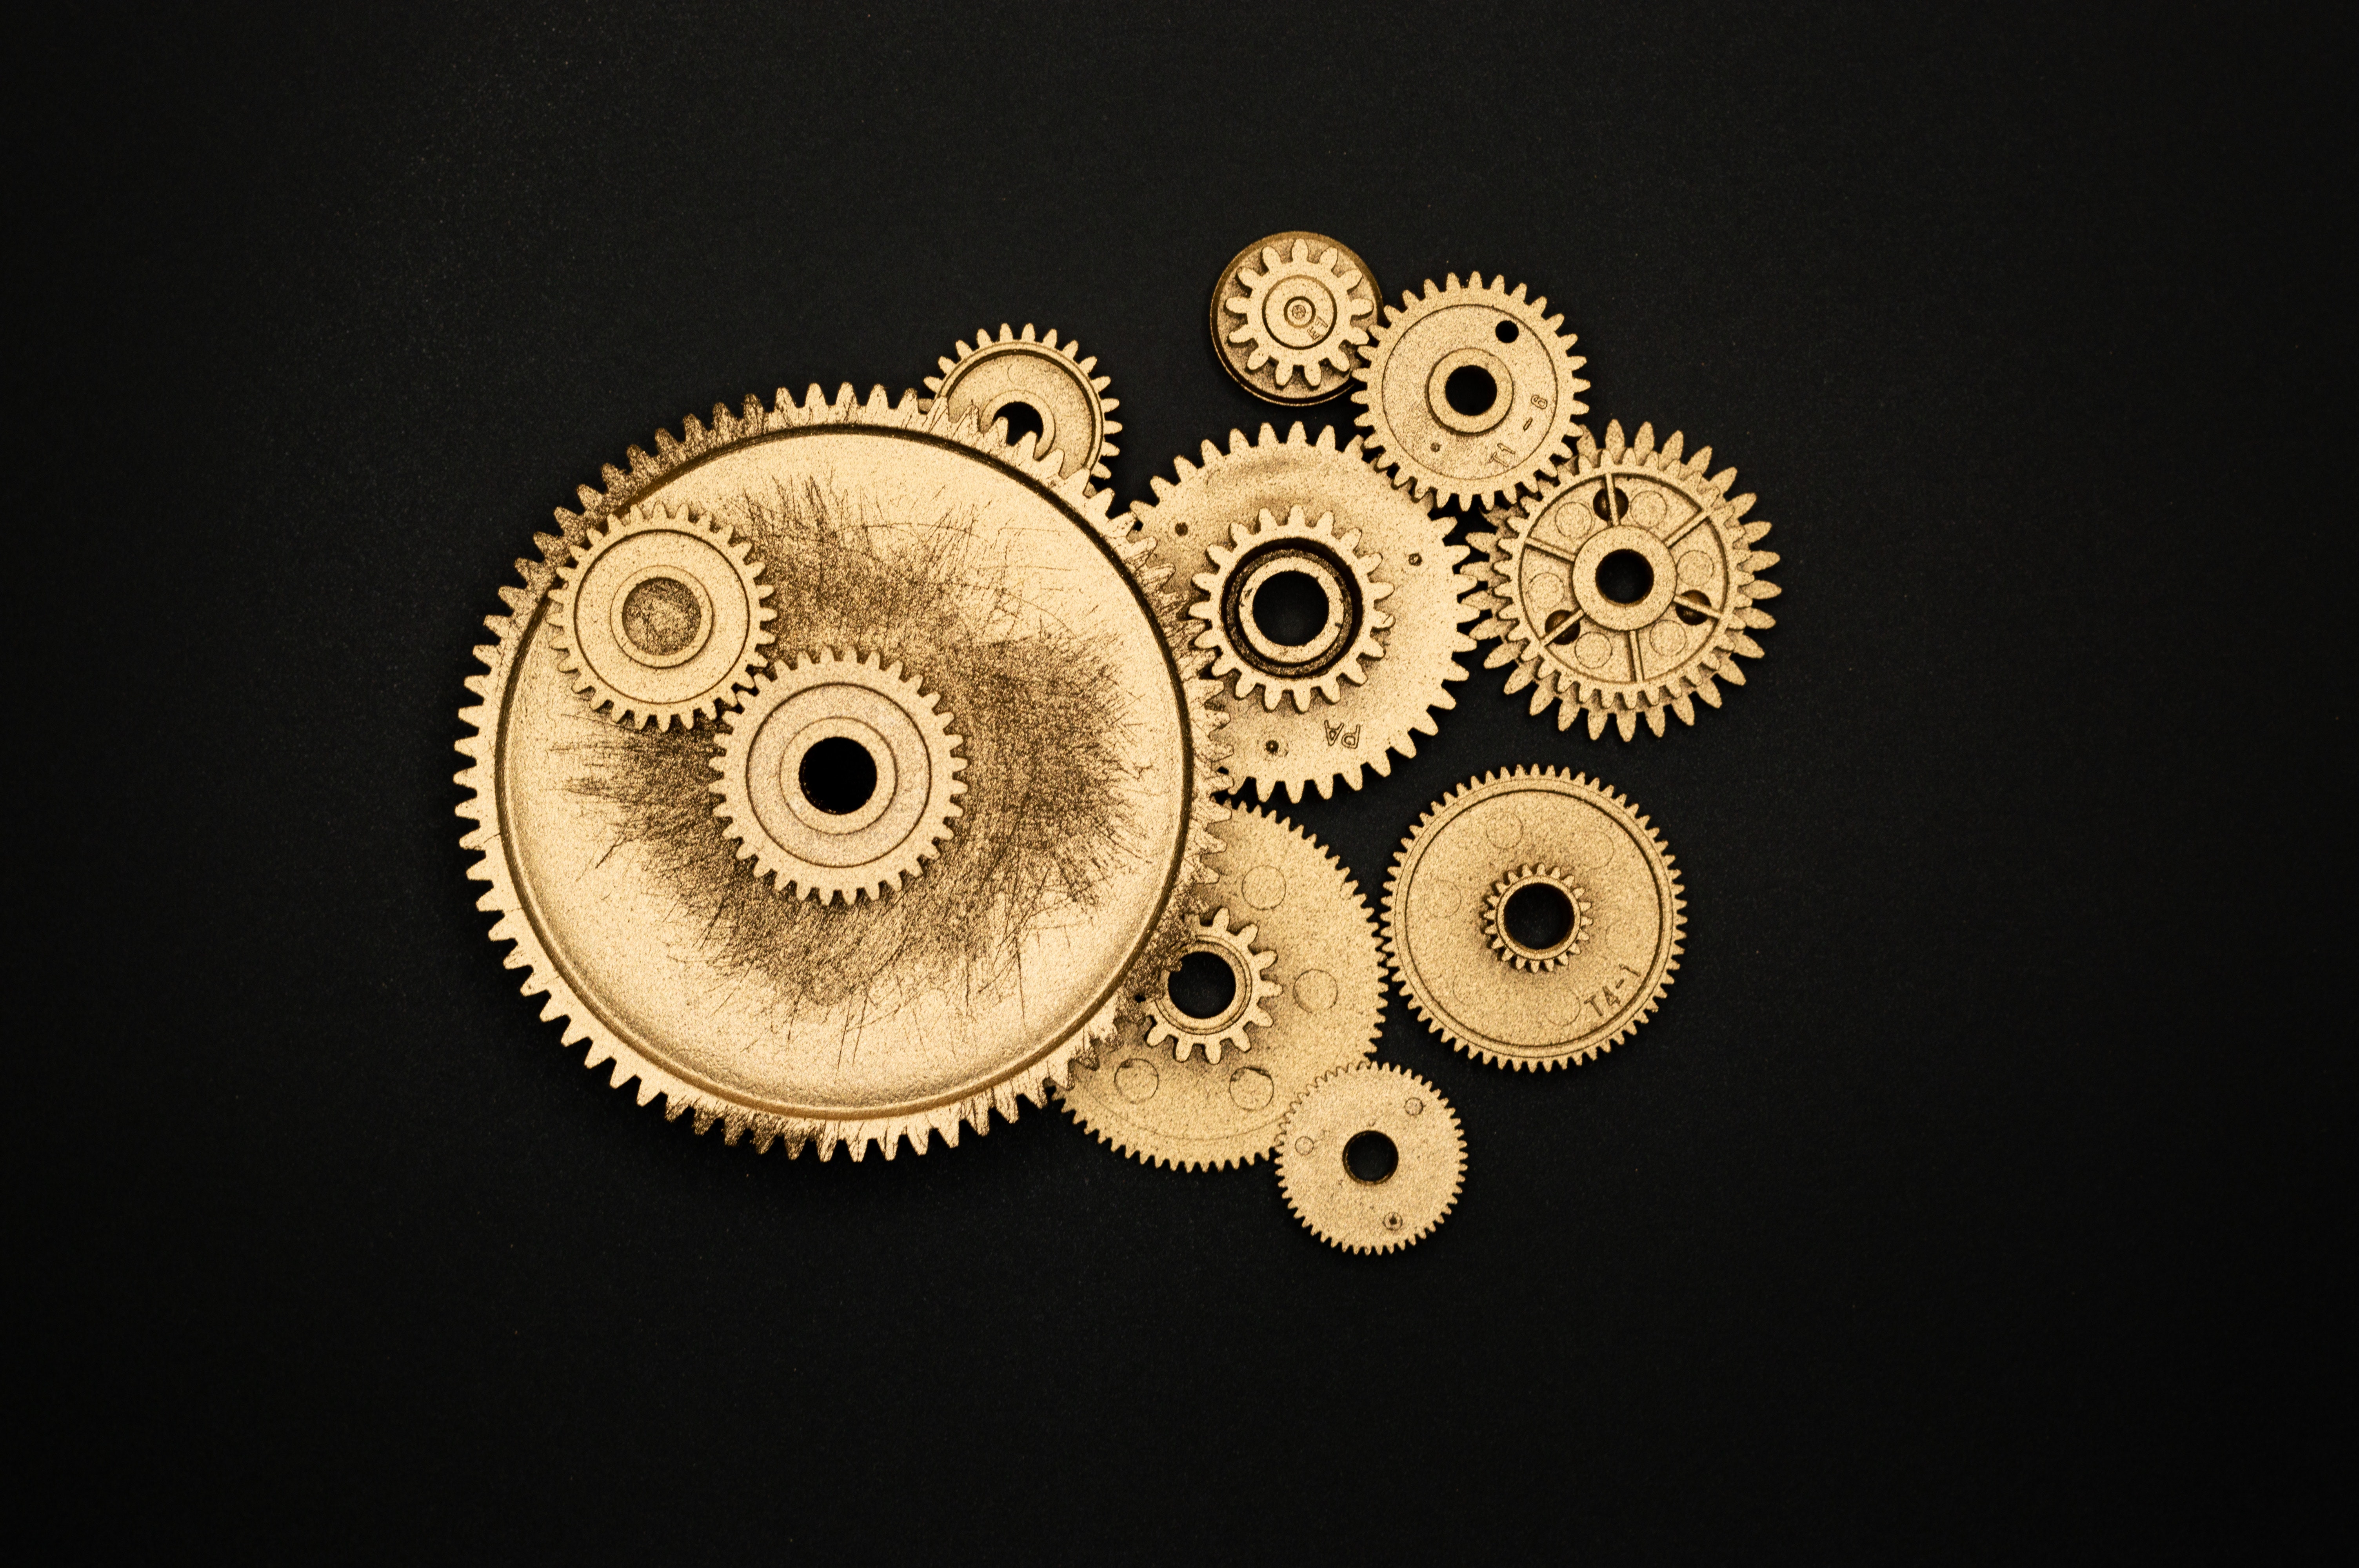 Golden gears on black background. Picture by Miguel Á. Padriñán from Pexels